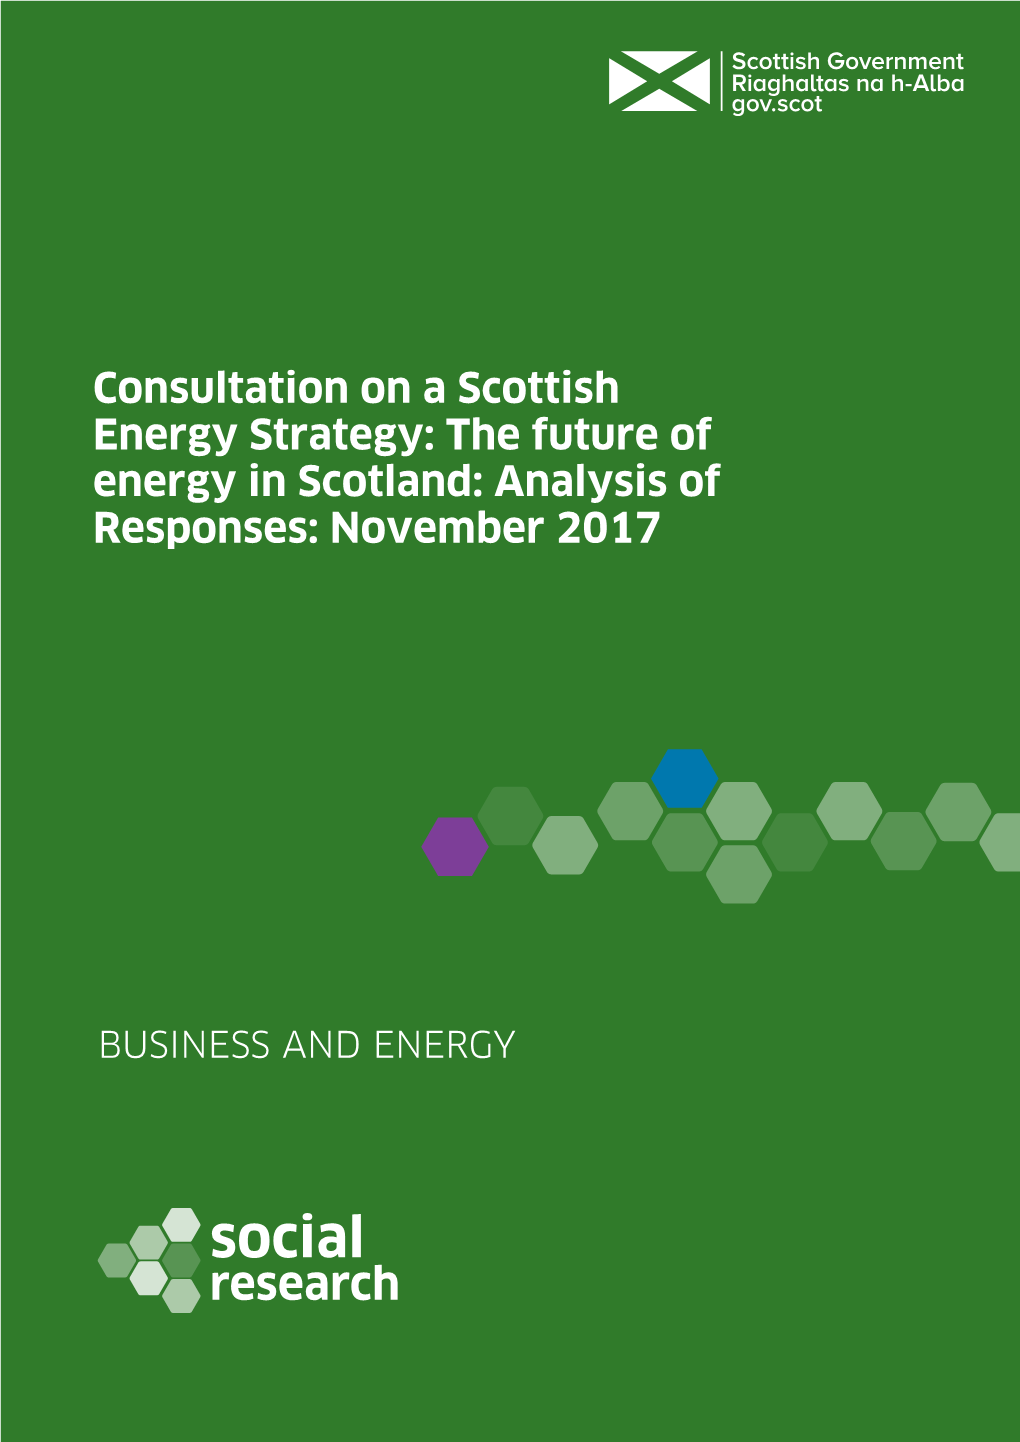 Consultation on a Scottish Energy Strategy: the Future of Energy in Scotland: Analysis of Responses: November 2017